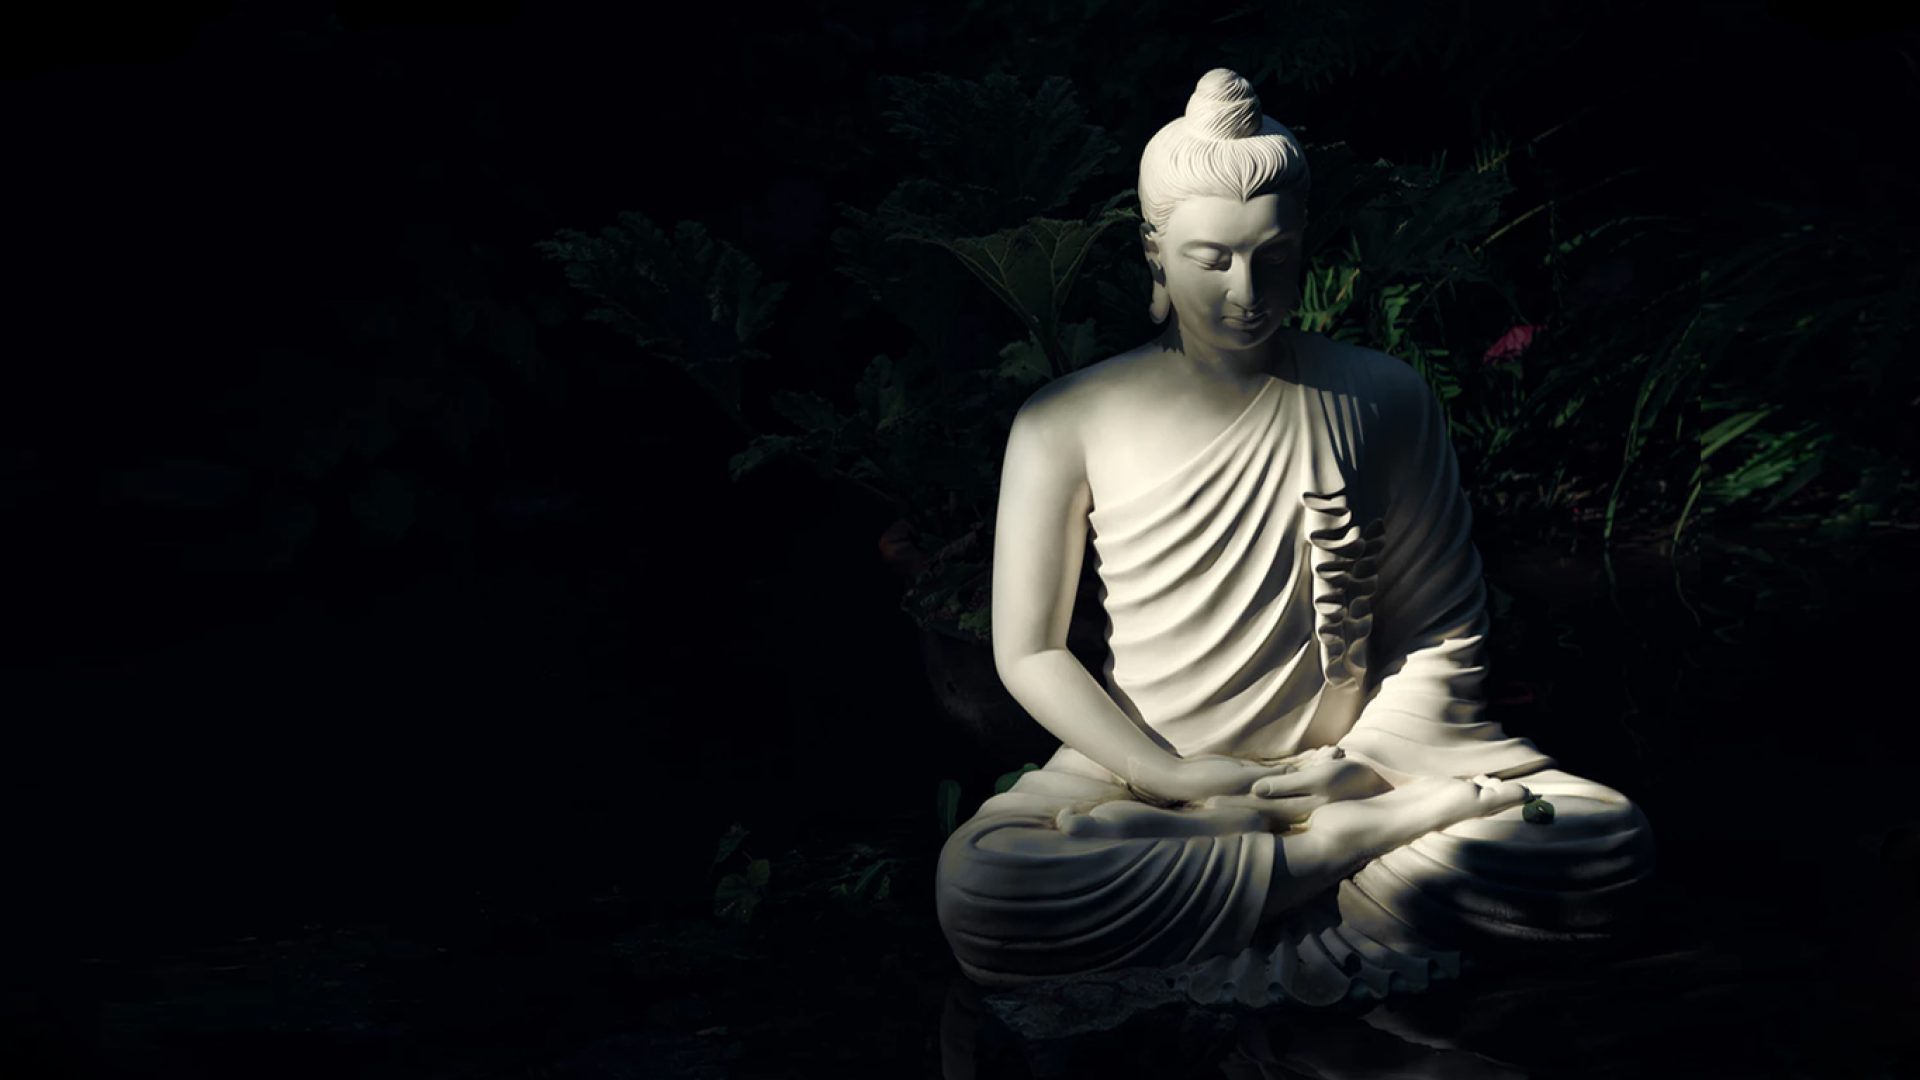 1366×768 Lord Buddha Hd Wallpapers Full Size Download - God HD Wallpapers